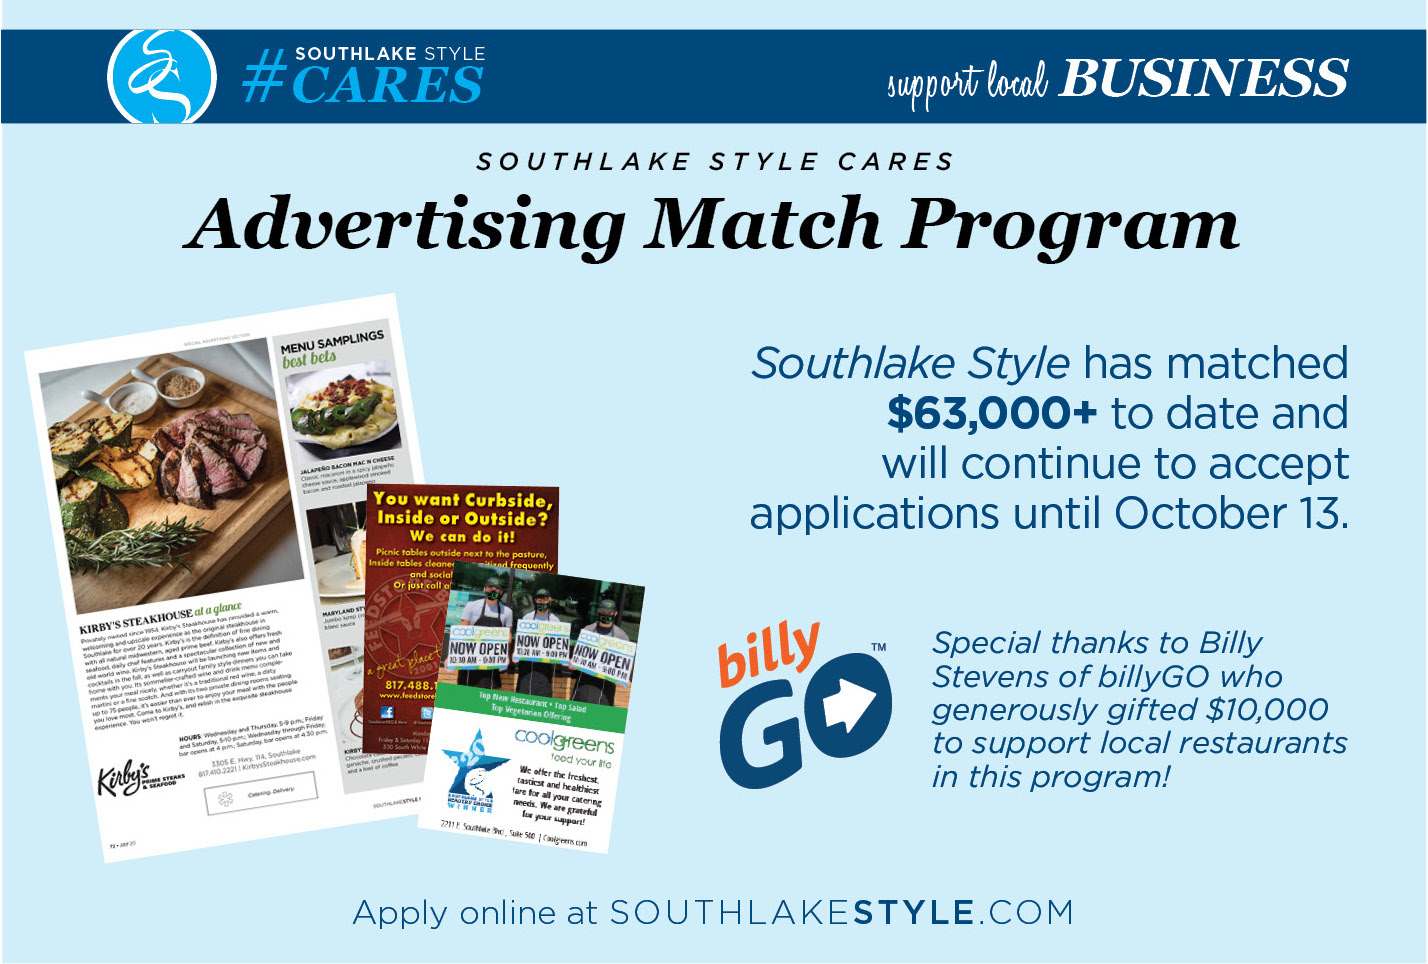 Advertising Match Program ad for Southlake Style